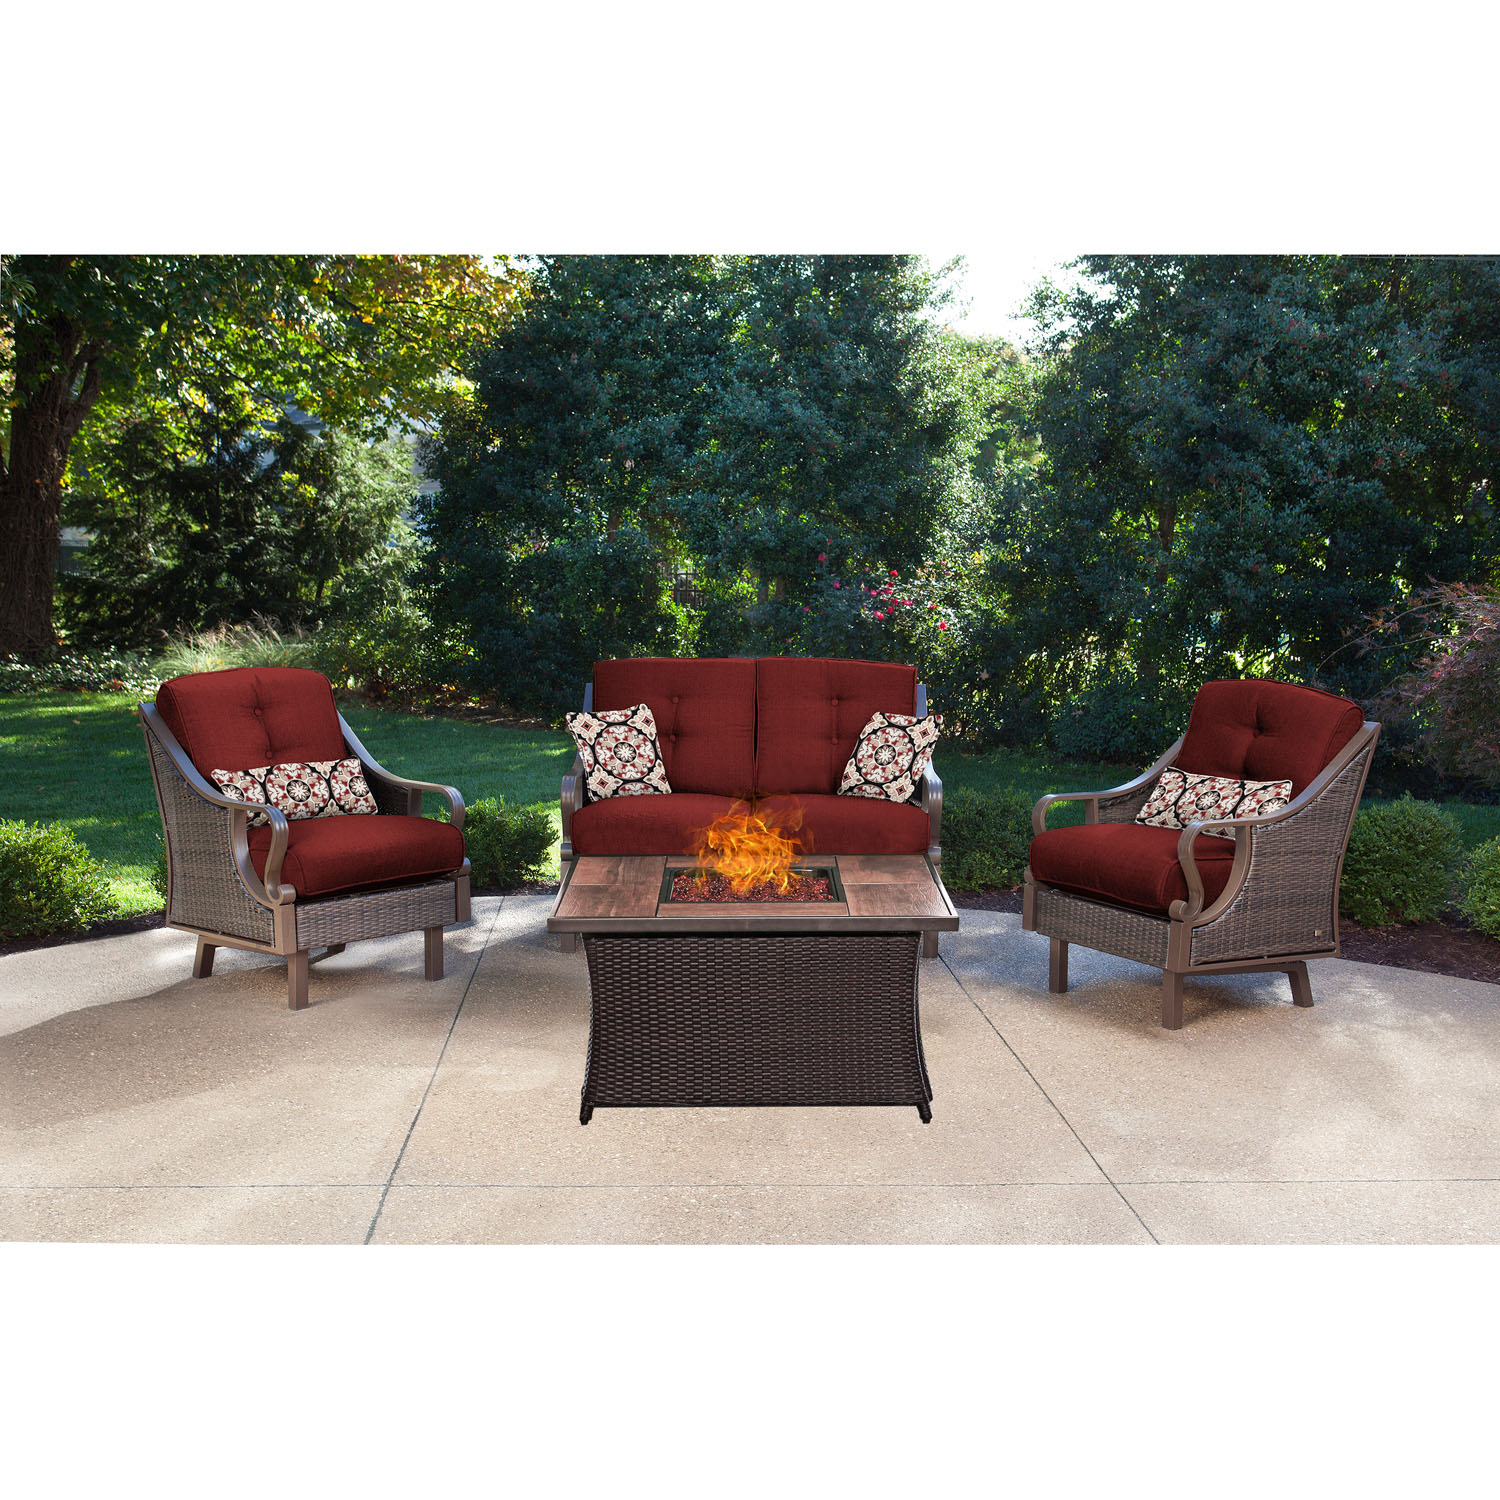 Hanover Ventura 4-Piece Fire Pit Lounge Set with Glazed Faux-Wood Tile Top - image 1 of 11